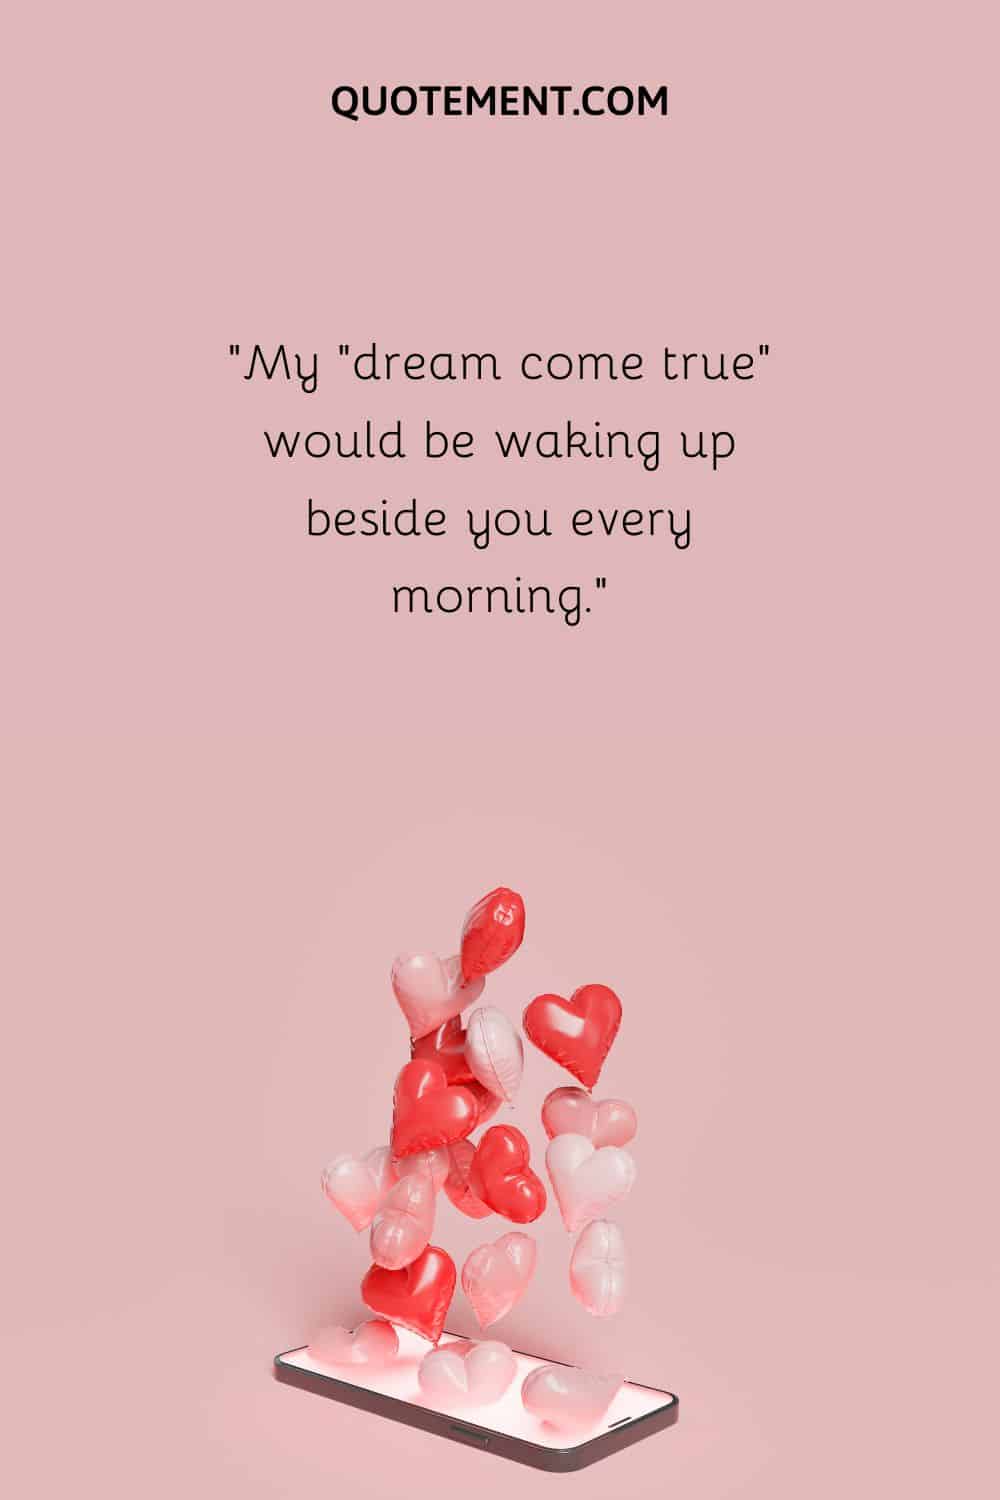 “My “dream come true” would be waking up beside you every morning.”